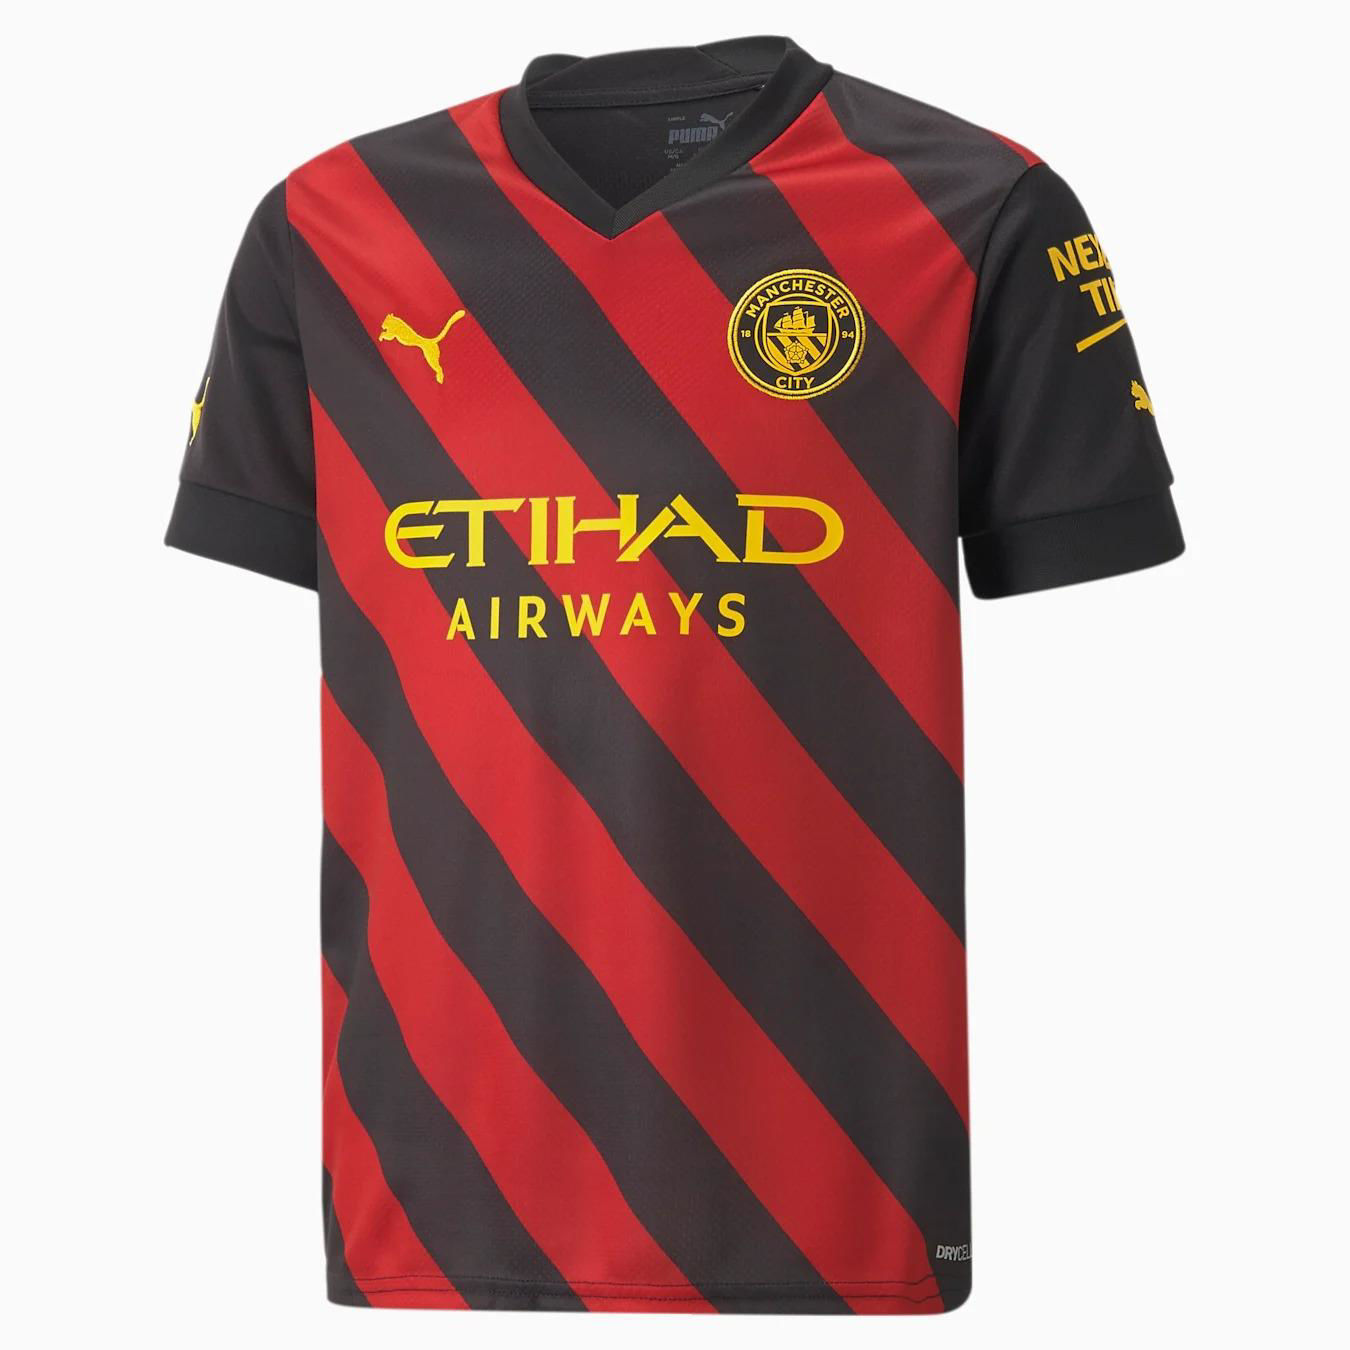 Picture of MCFC AWAY JERSEY REPLICA JR  176 (XL) Black/red